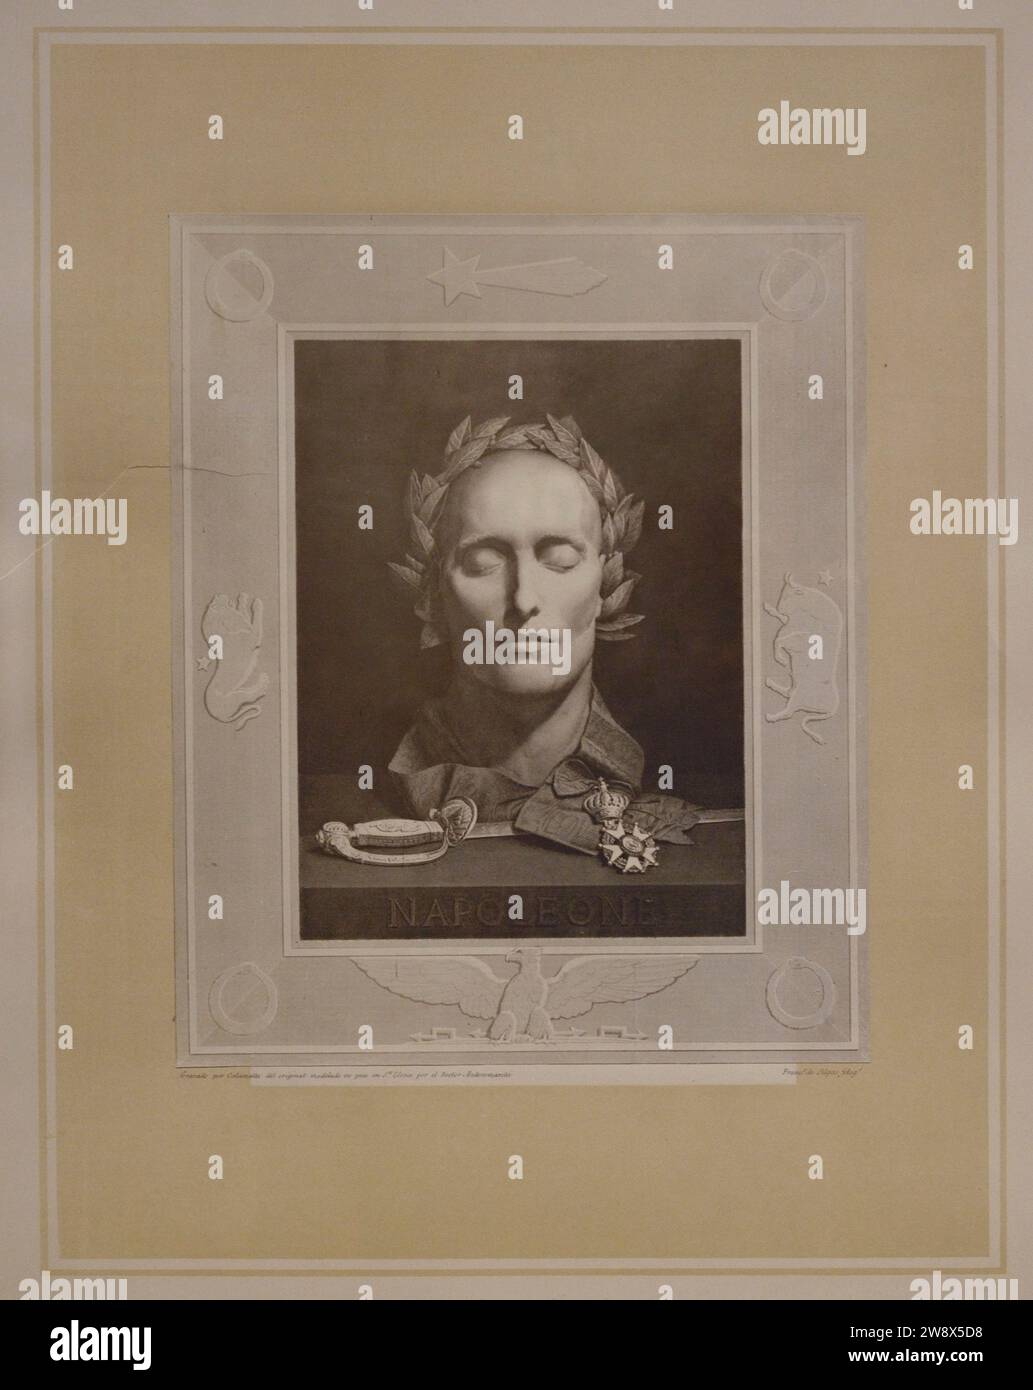 Napoleon's mask, 1865-1875. Photo by Francisco de Selgas (active in the 1860s and 1870s). Albumen paper on card, 320 x 265 mm. It depicts the image by the original artist, Luigi Calamatta, wearing Napoleon's death mask. Prado Museum. Madrid. Spain. Stock Photo